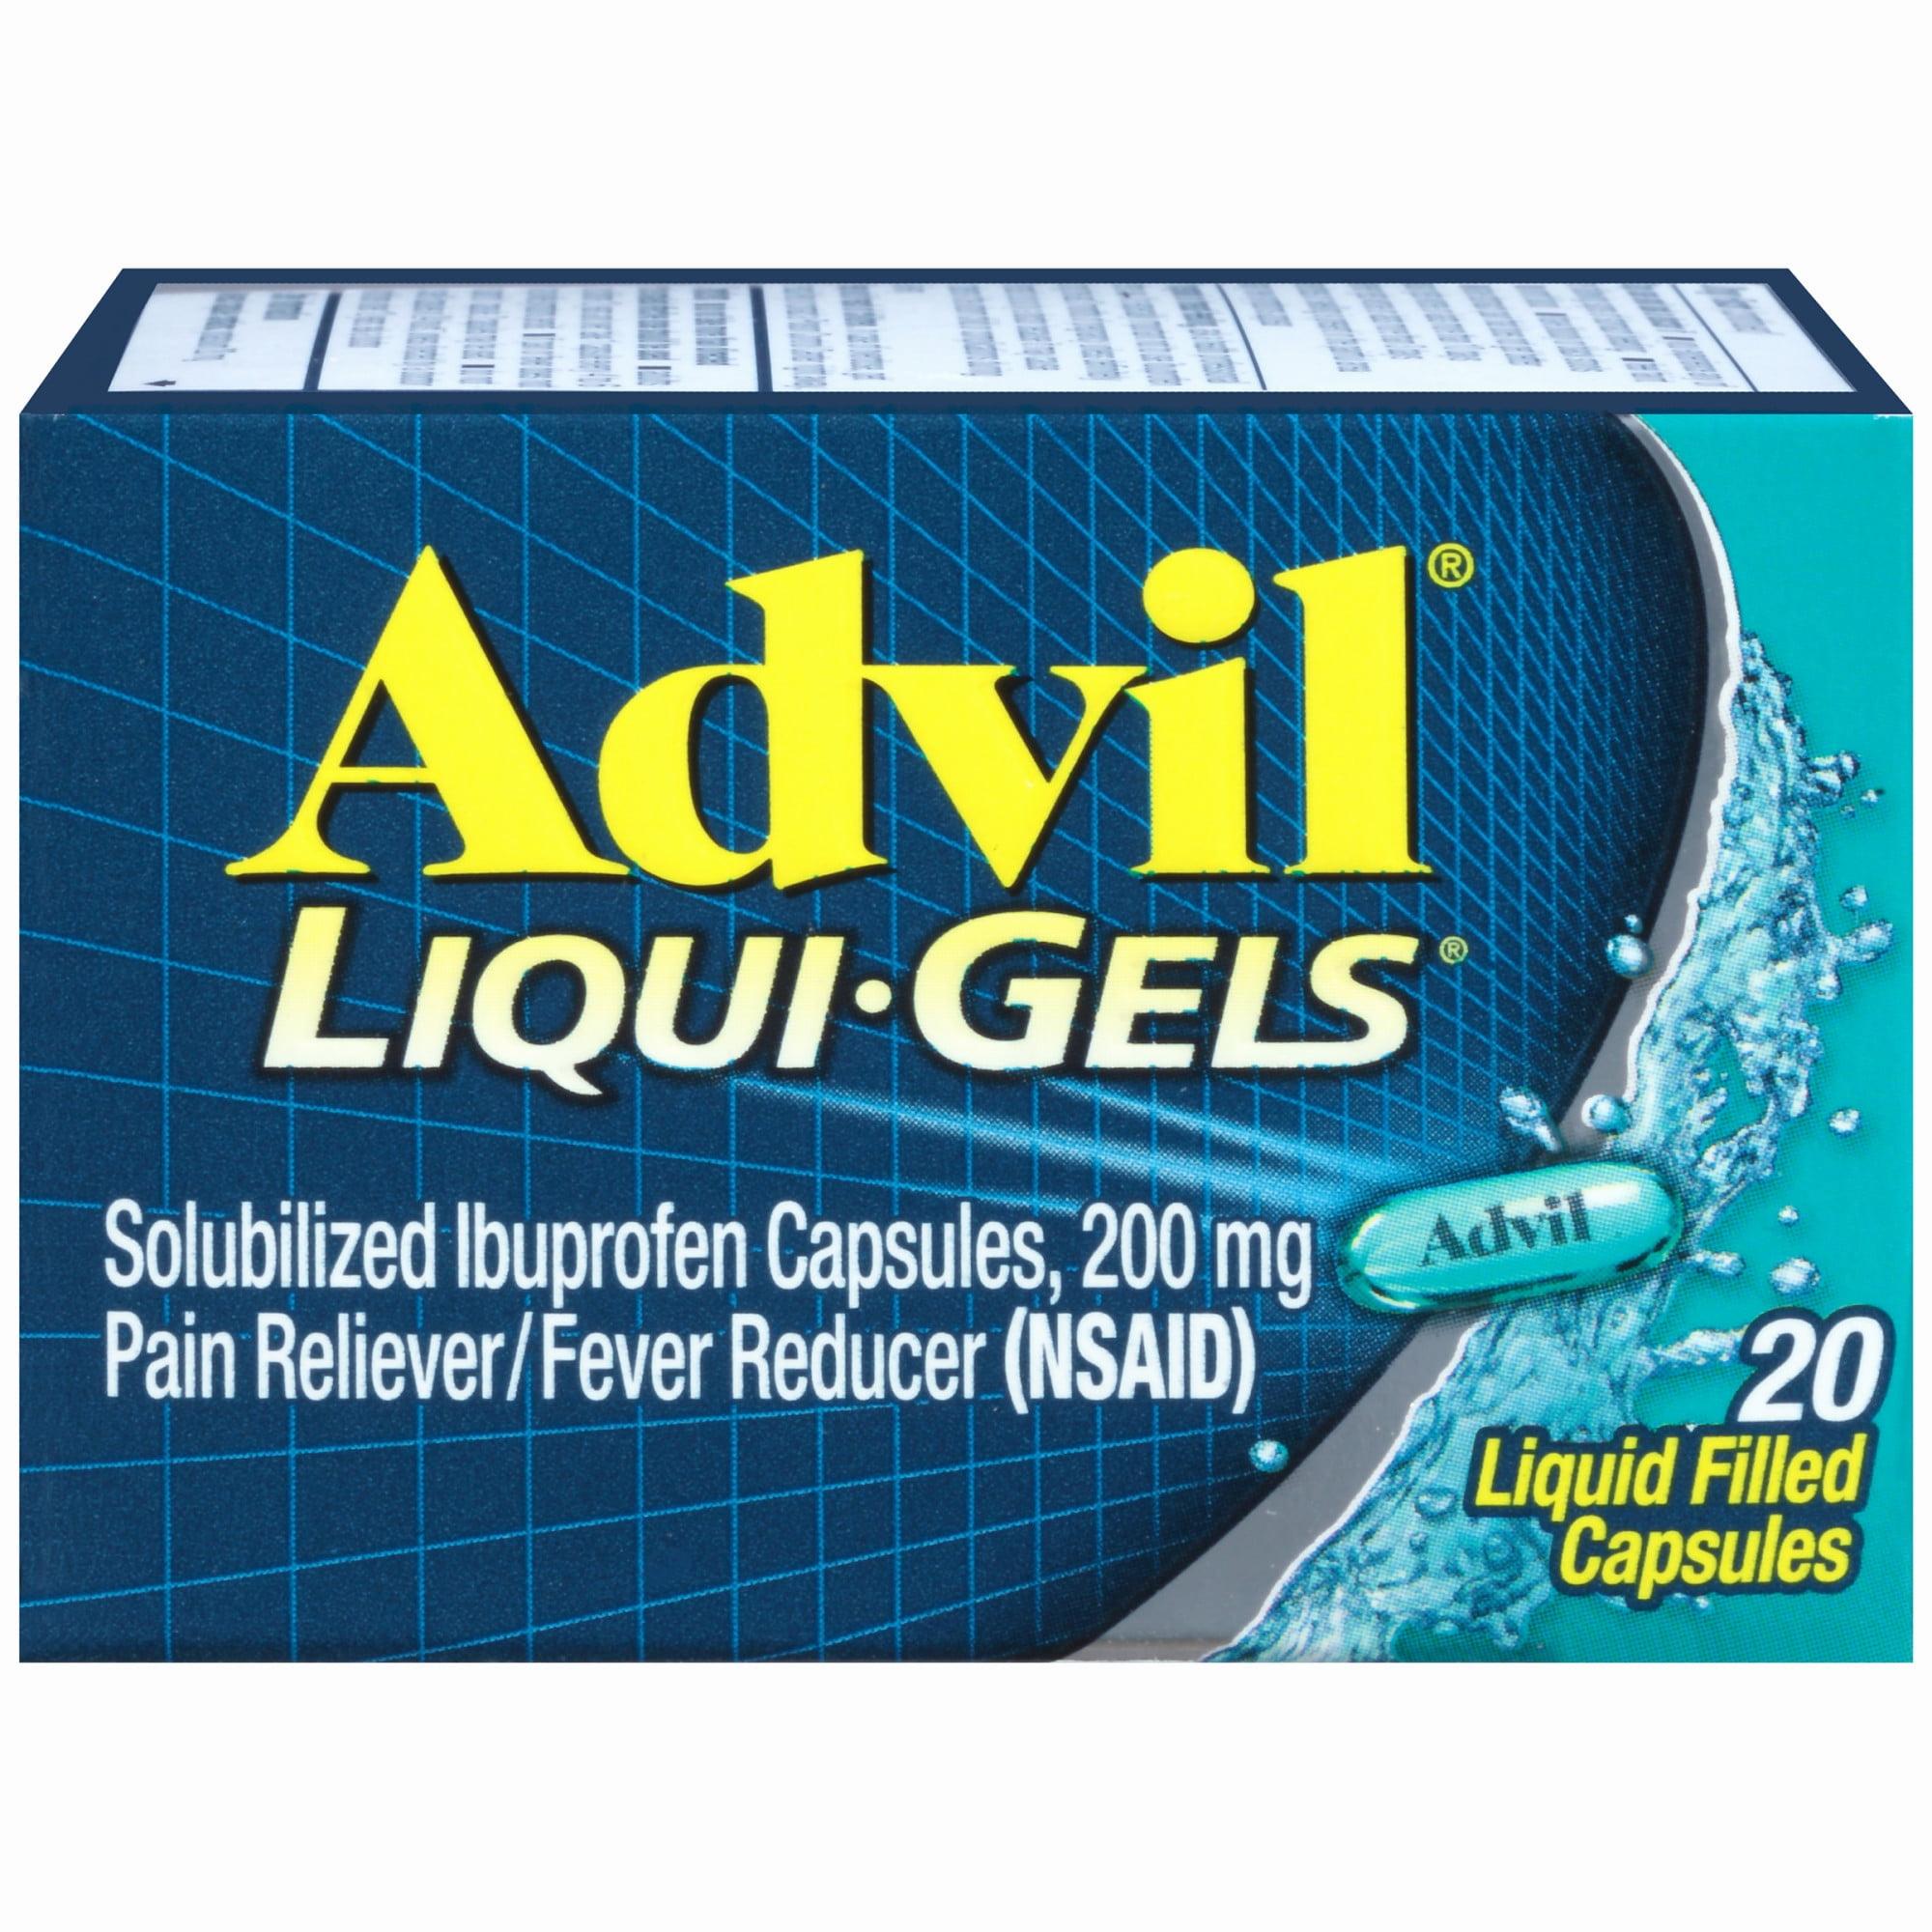 A blue and green box of Advil Liqui-Gels, a pain reliever and fever reducer.